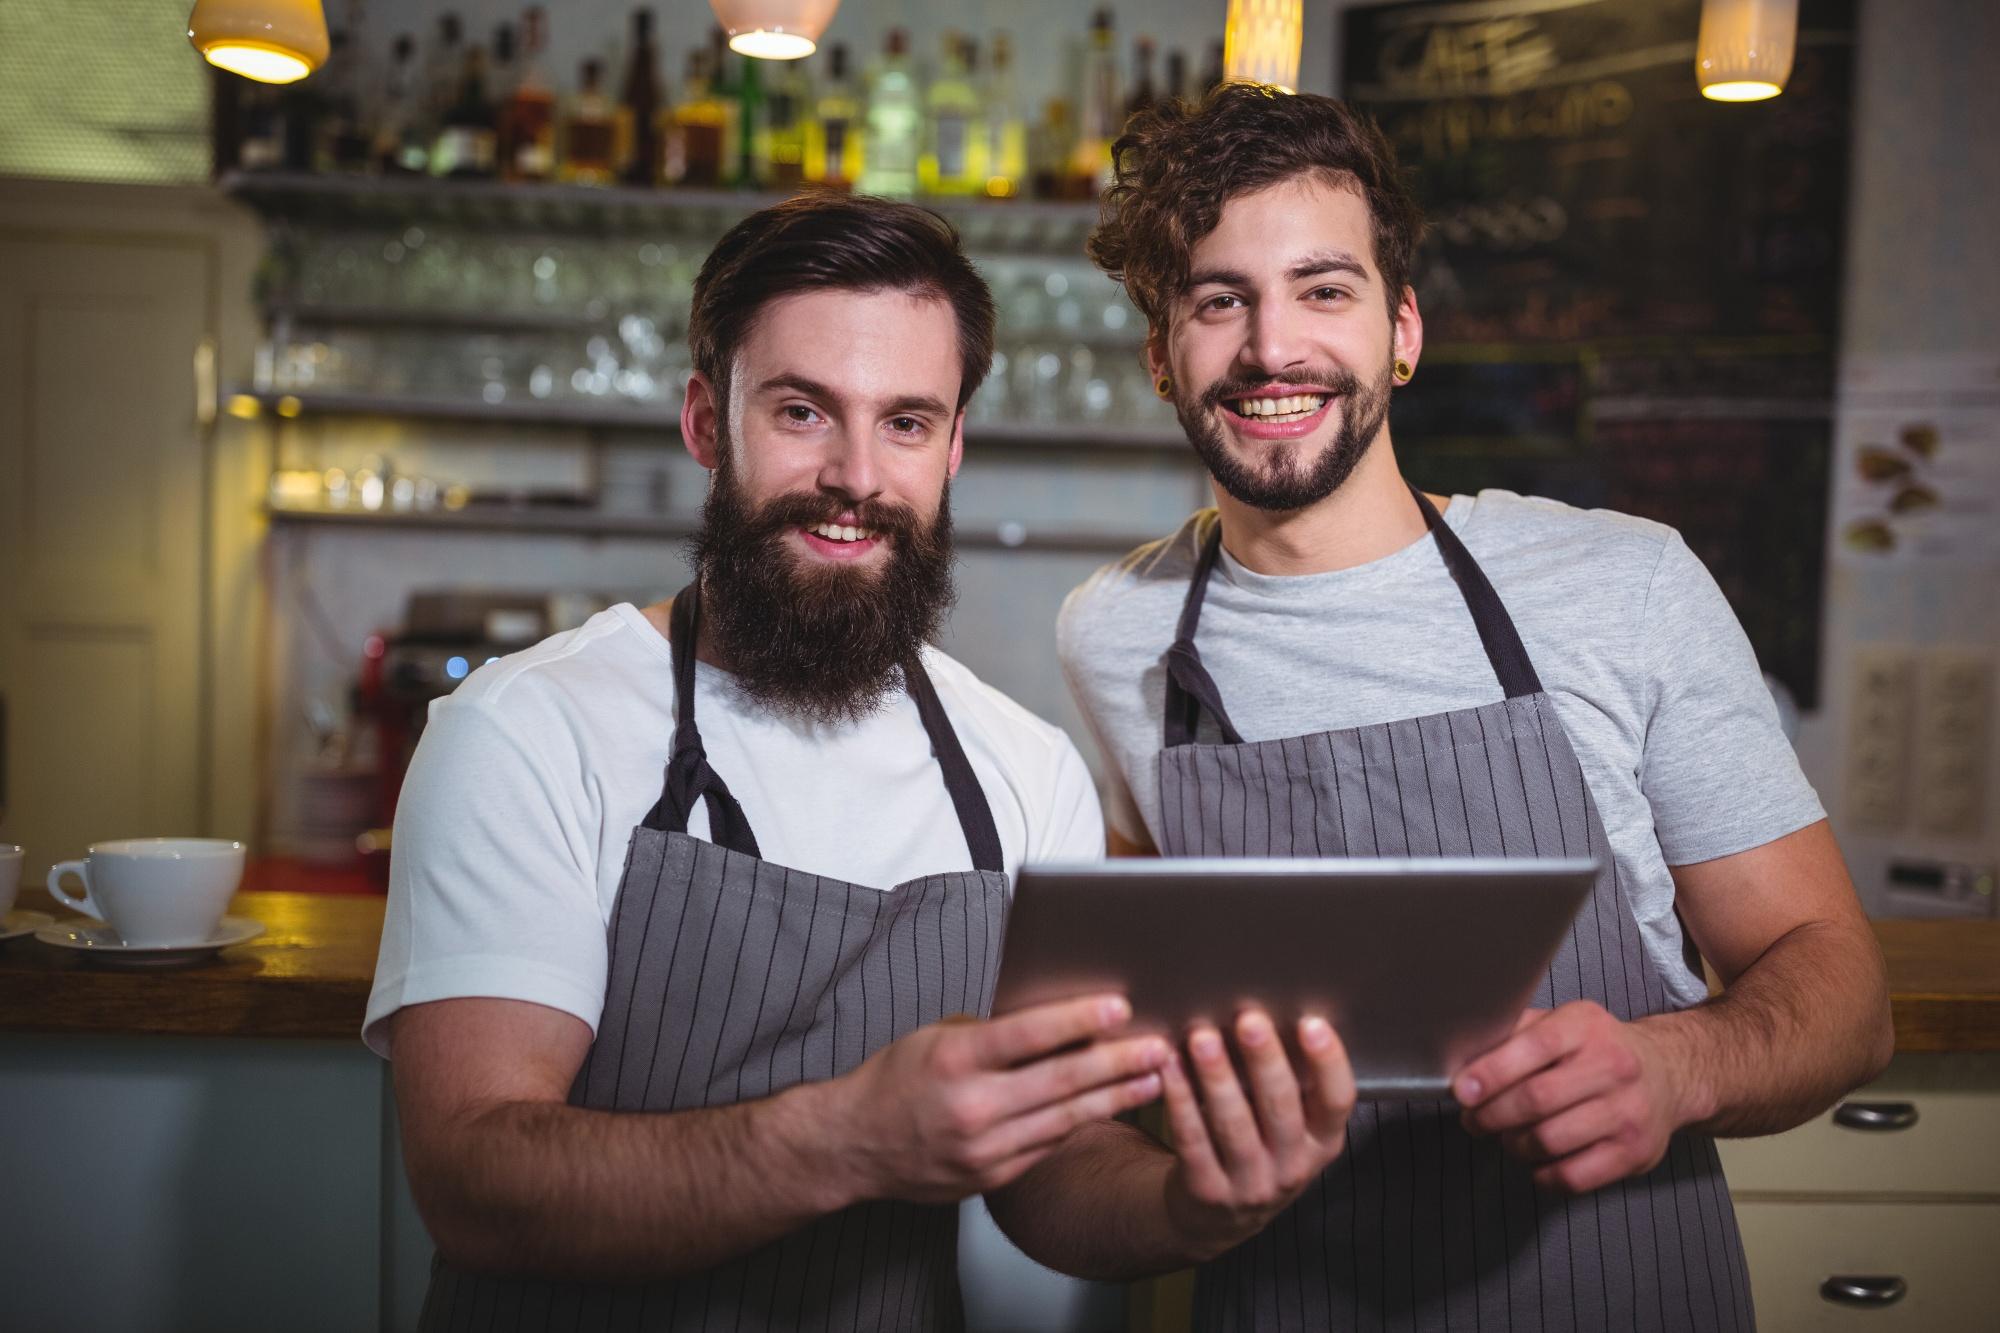 How to Make Your Website Restaurant Experience More Enjoyable